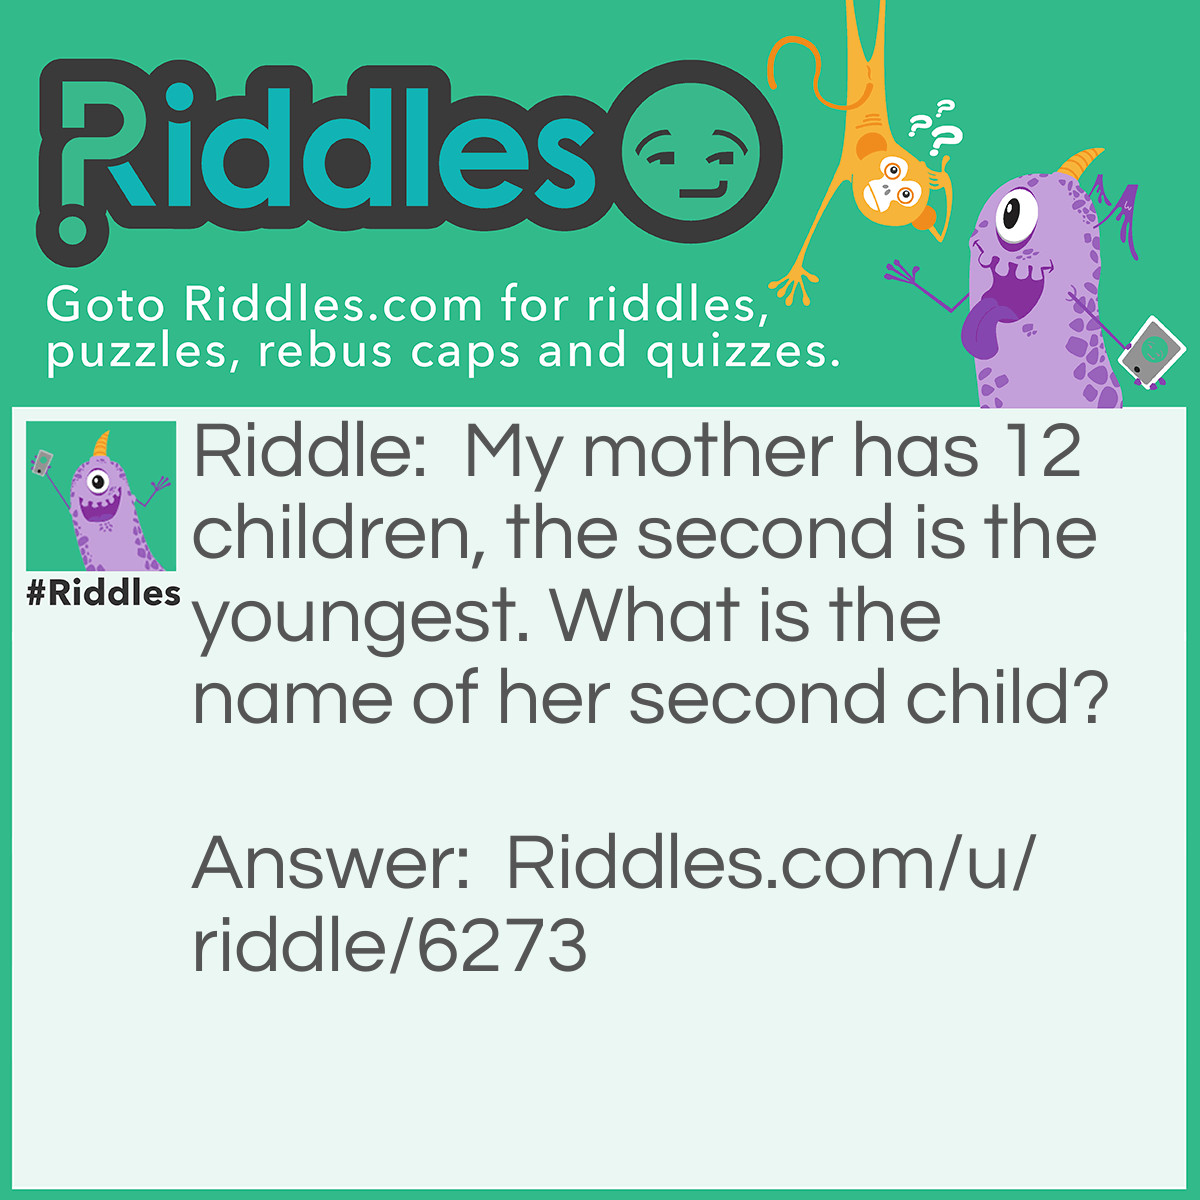 Riddle: My mother has 12 children, the second is the youngest. What is the name of her second child? Answer: February.